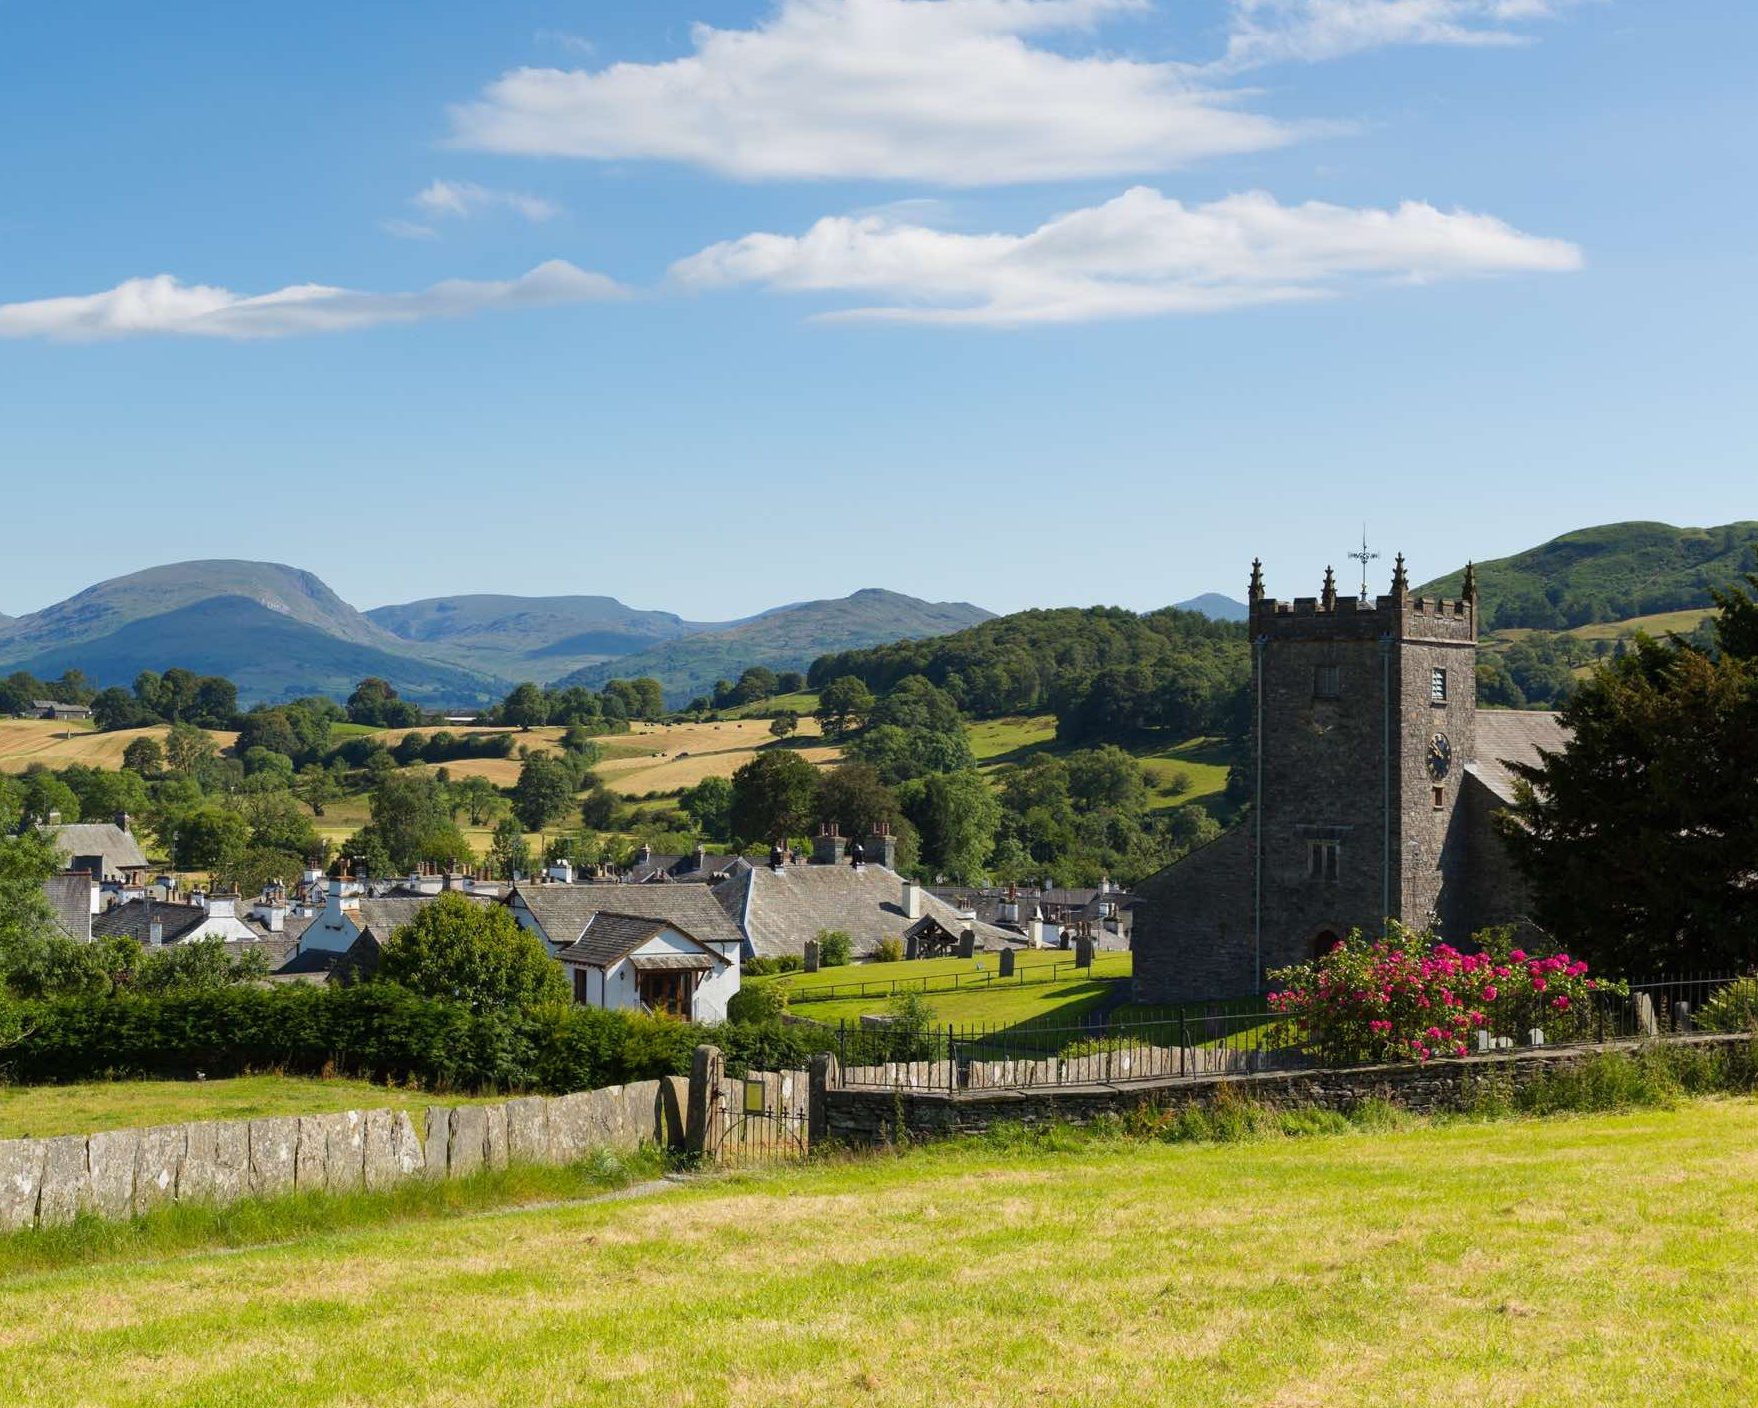 Things to do in Hawkshead to avoid the crowds